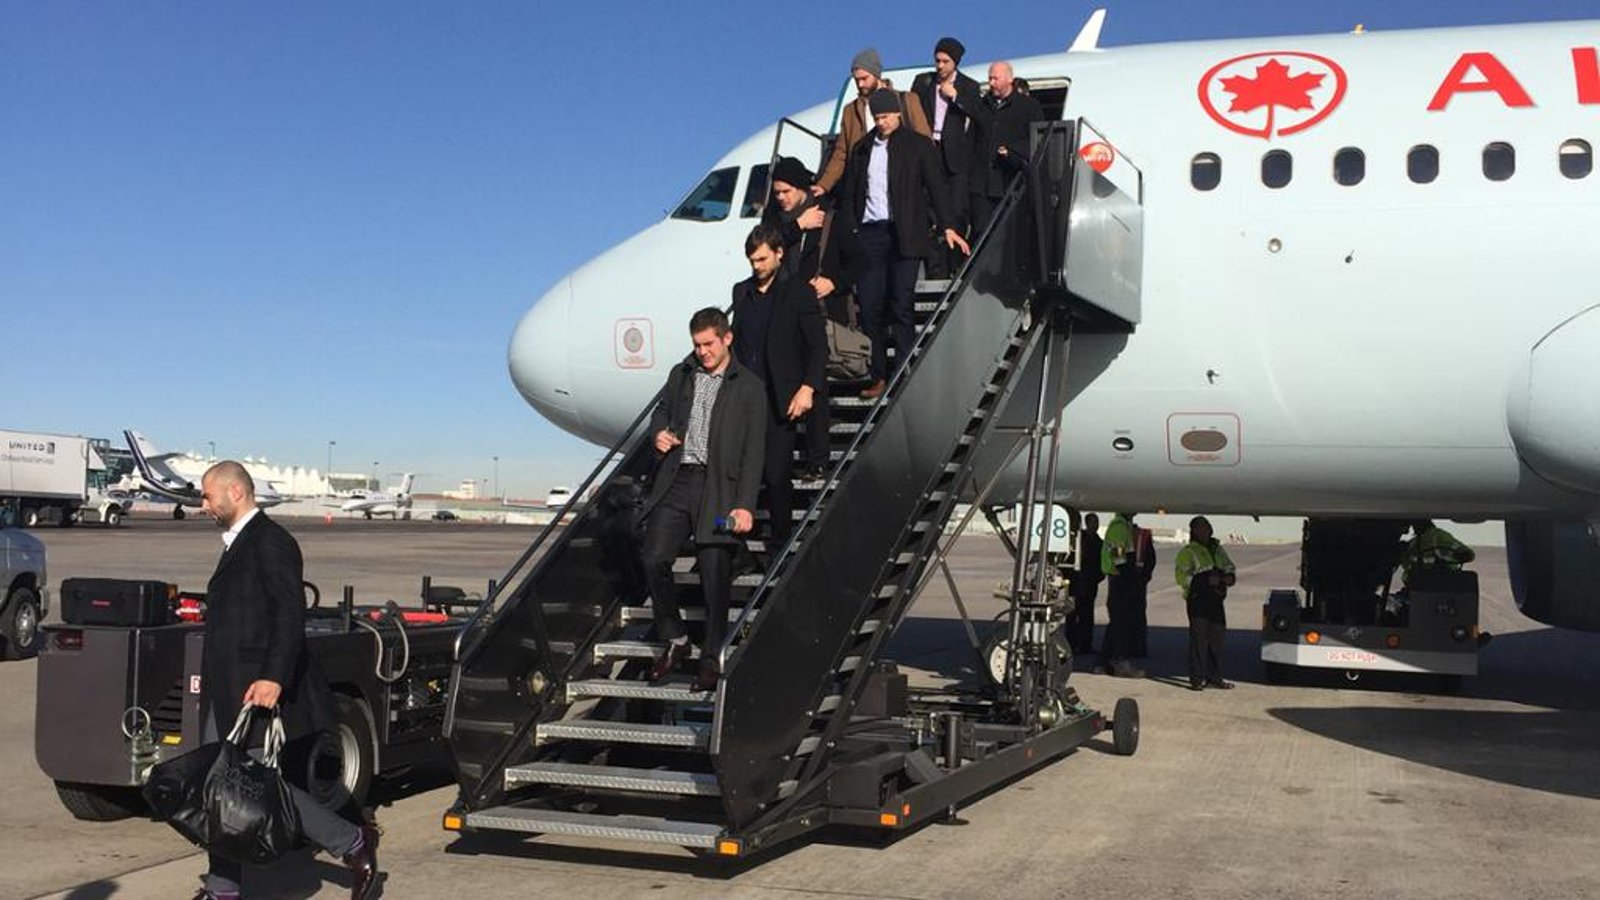 Emergency landing for Flames’ plane after last night’s loss